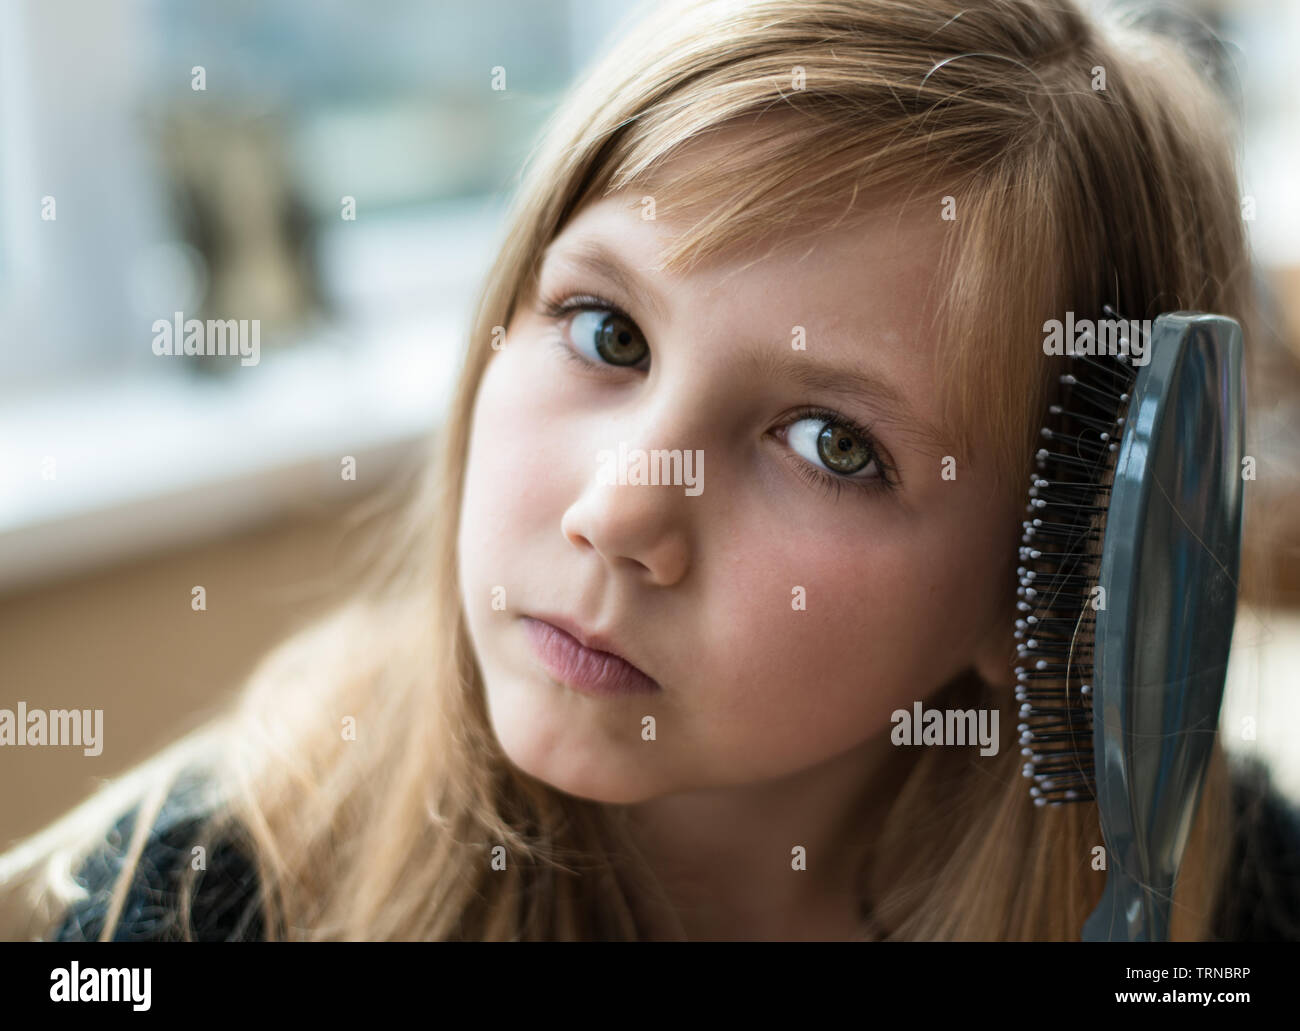 Pretty Young blonde girl brushing her hair and looking coy Stock Photo